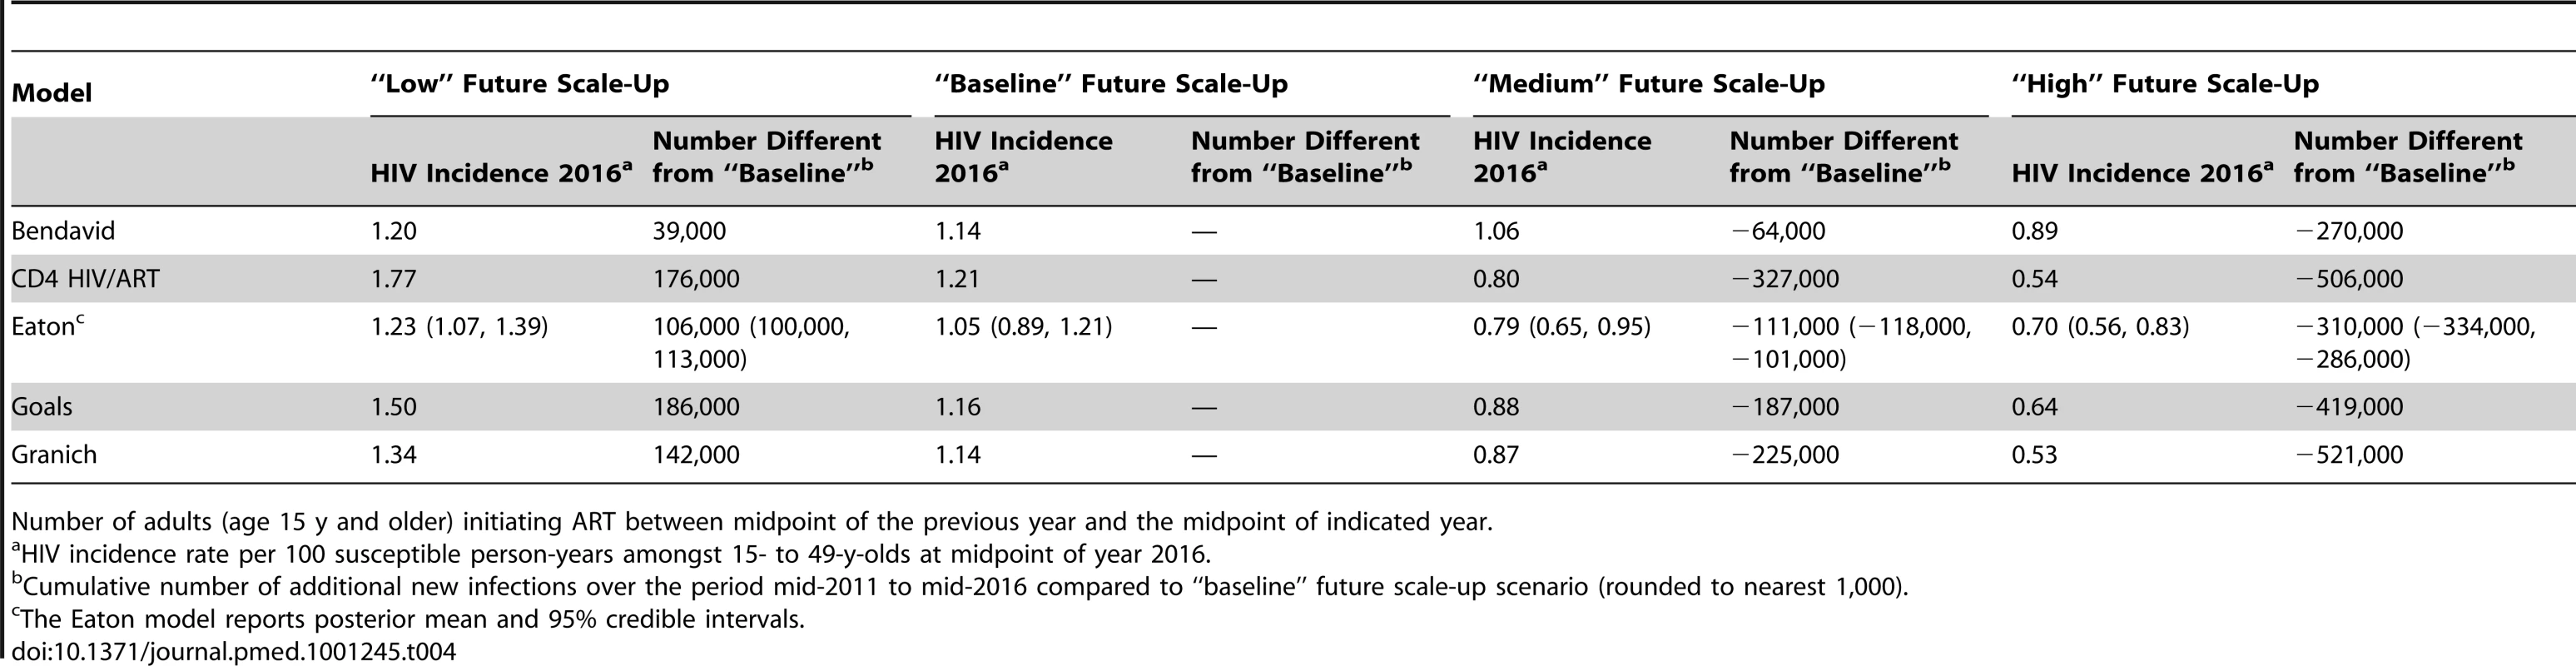 HIV incidence rate per 100 person-years in year 2016 for different potential scenarios of future ART scale-up.